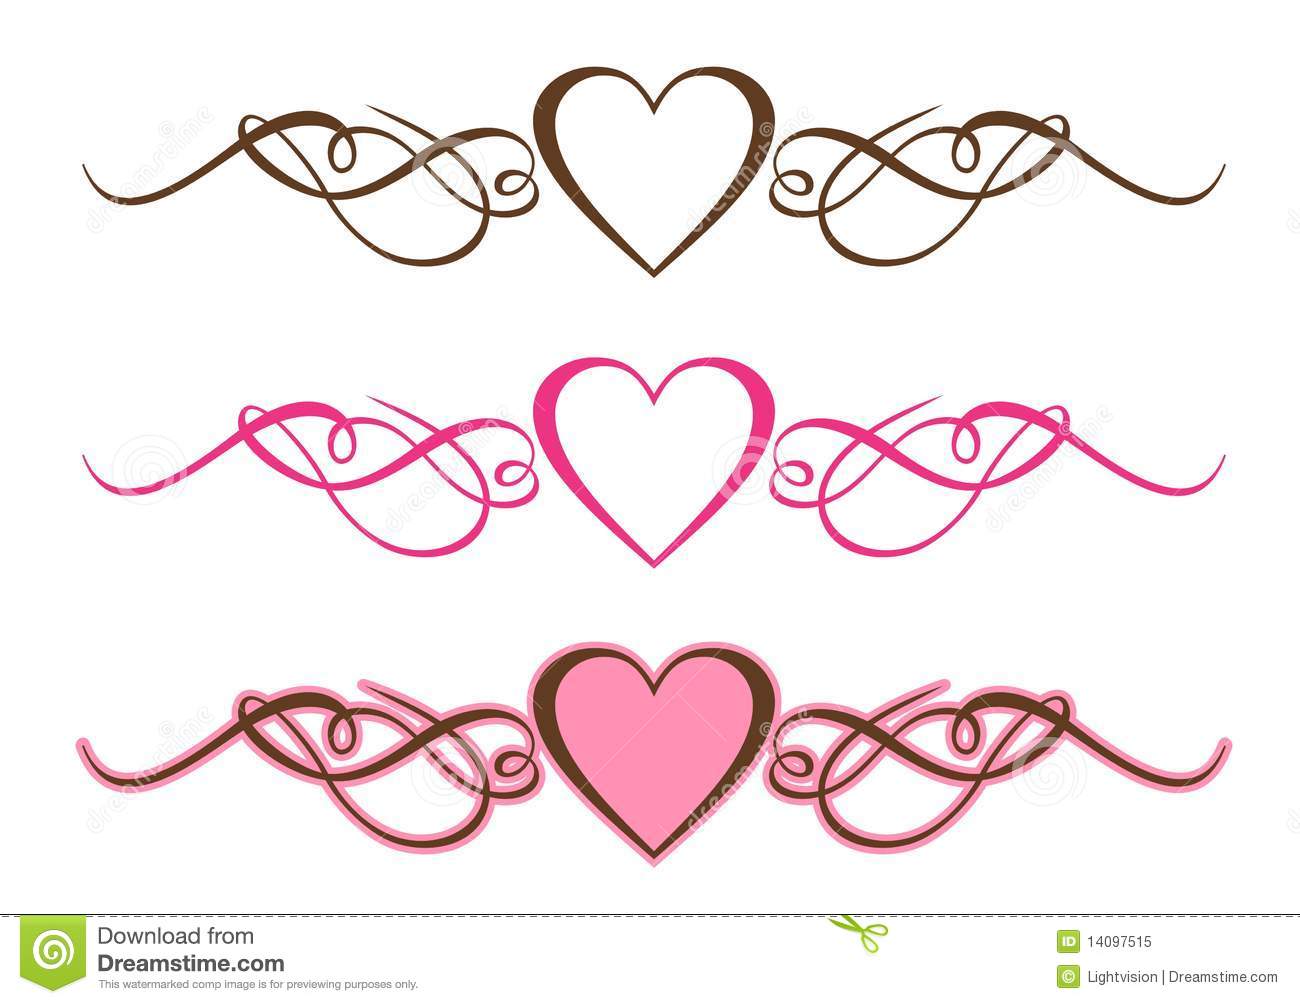 Free Scrollwork Heart Cliparts, Download Free Clip Art, Free